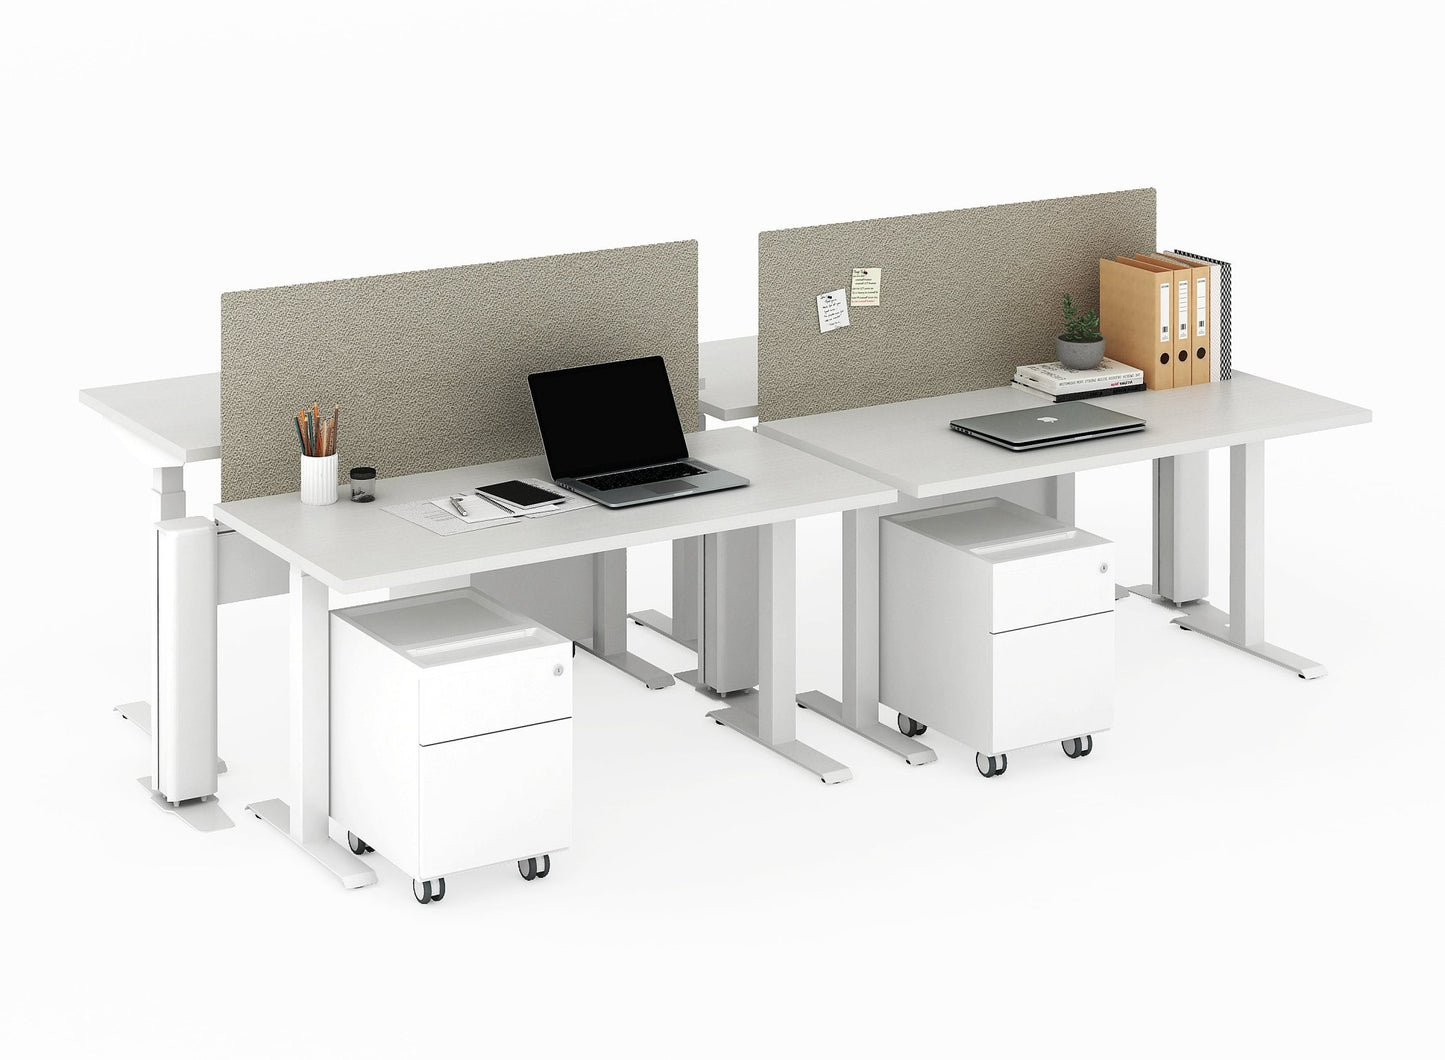 Load image into Gallery viewer, Beam Benching System w/ Sit Stand by Friant (4 pack, 72x30) - Wholesale Office Furniture
